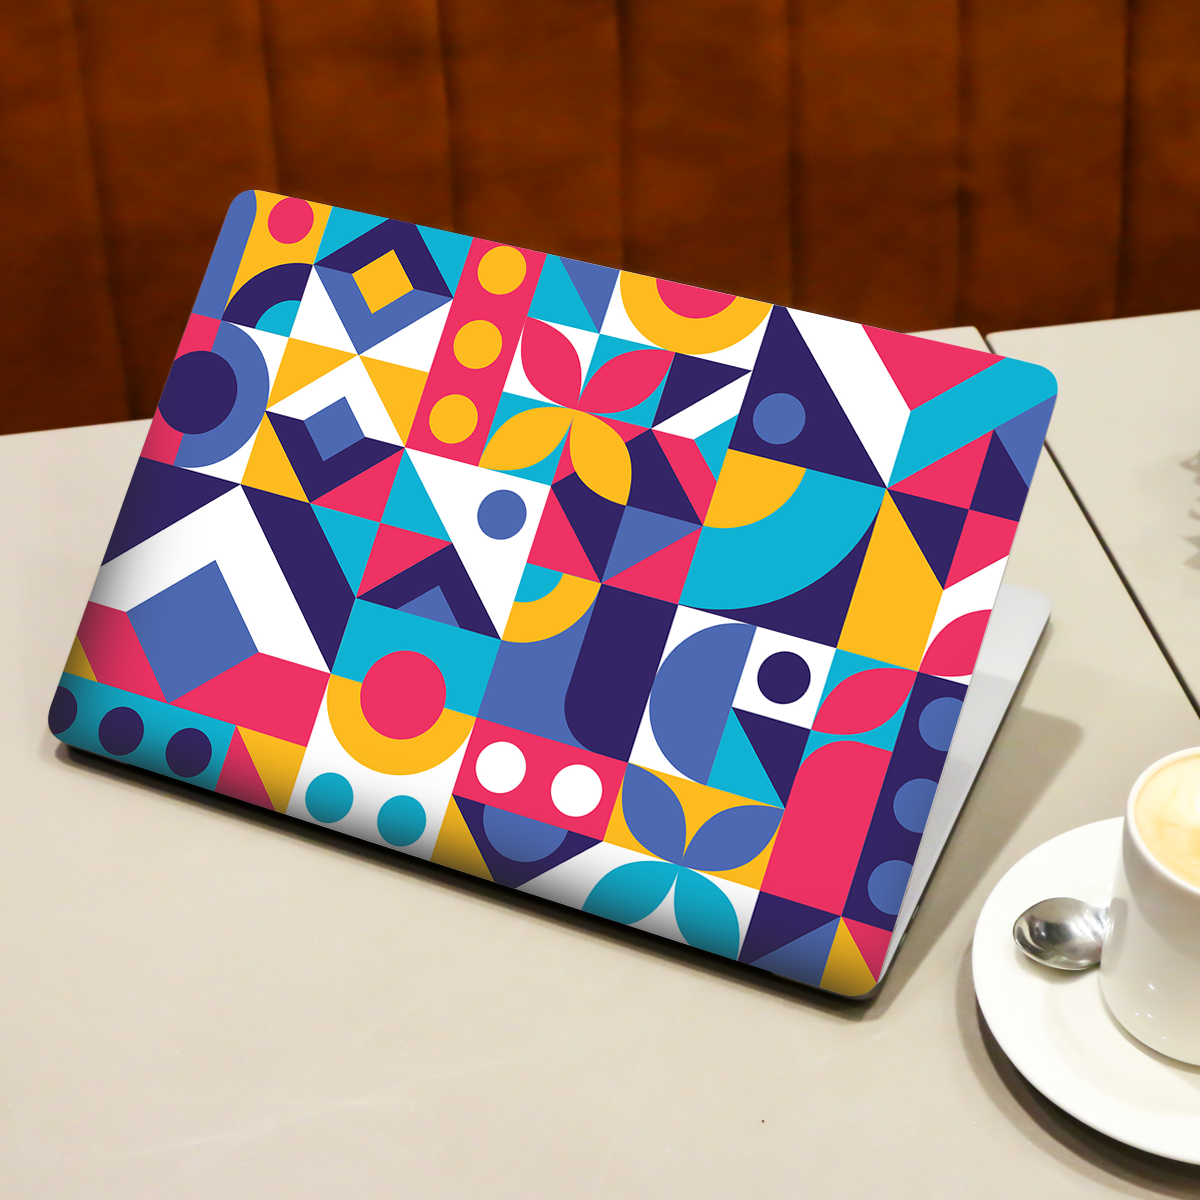 Geometric Shapes Abstract Laptop Skin